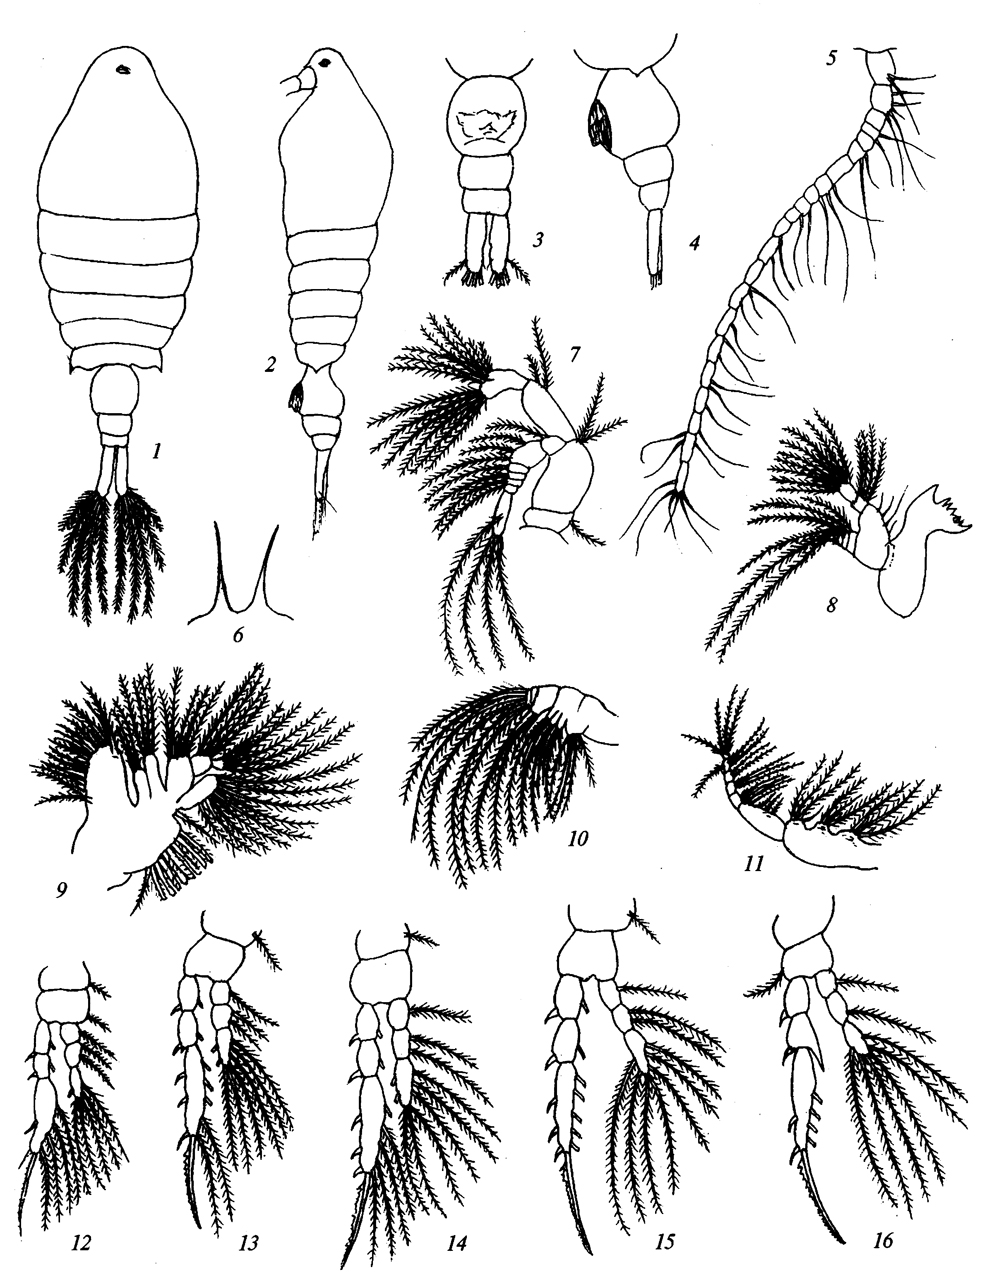 Species Centropages spinosus - Plate 1 of morphological figures